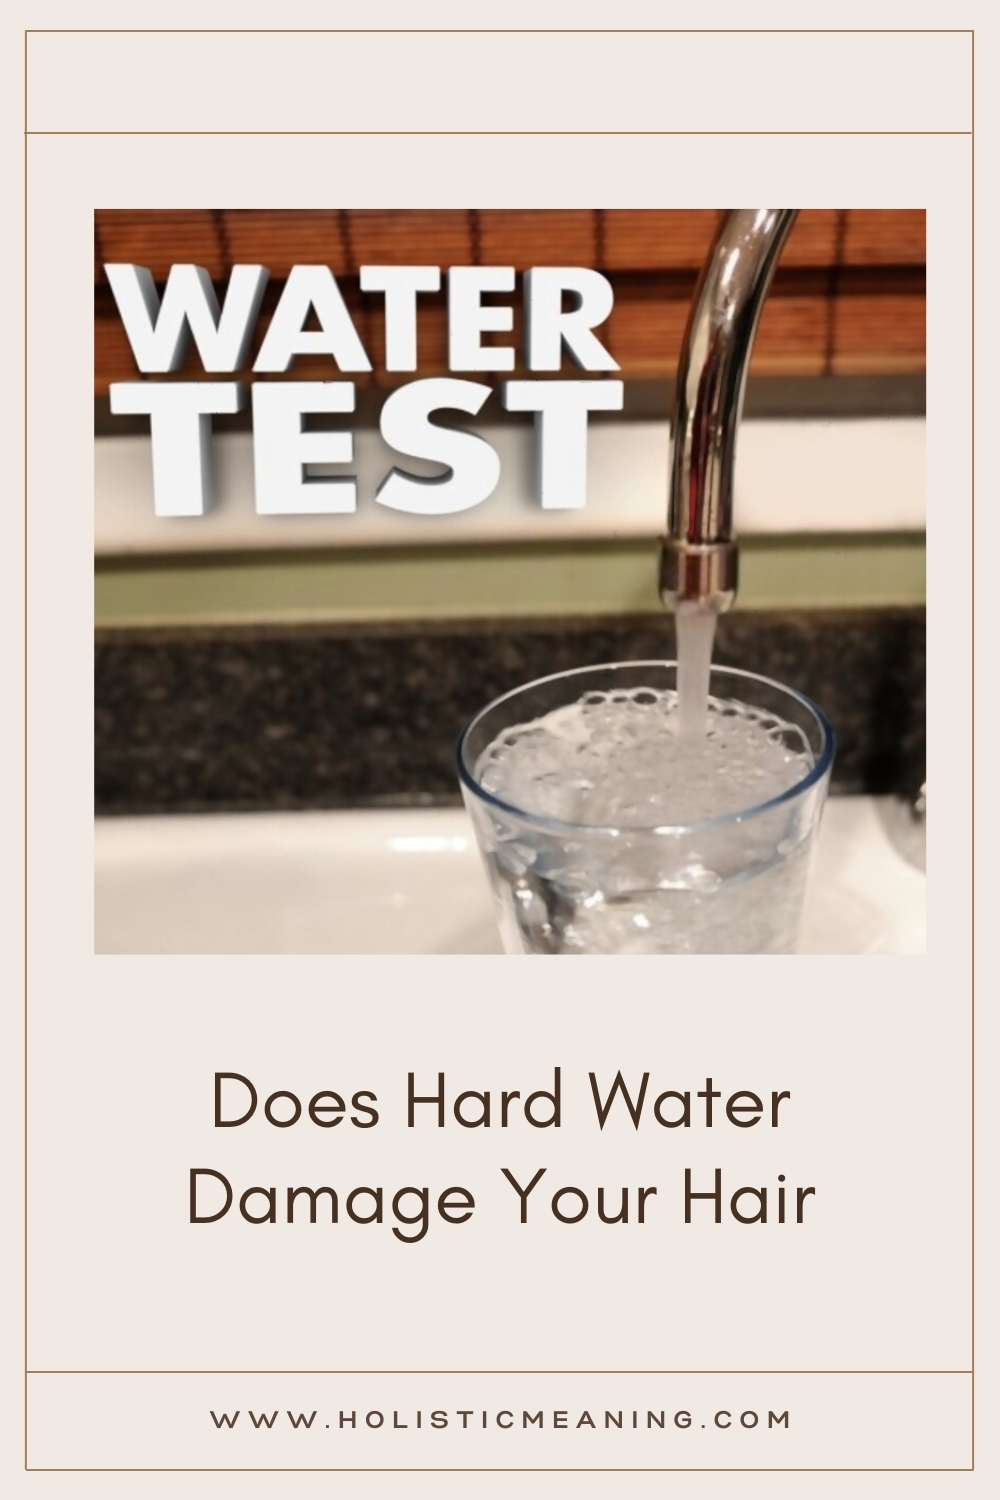 Does Hard Water Damage Your Hair? - Holistic Meaning